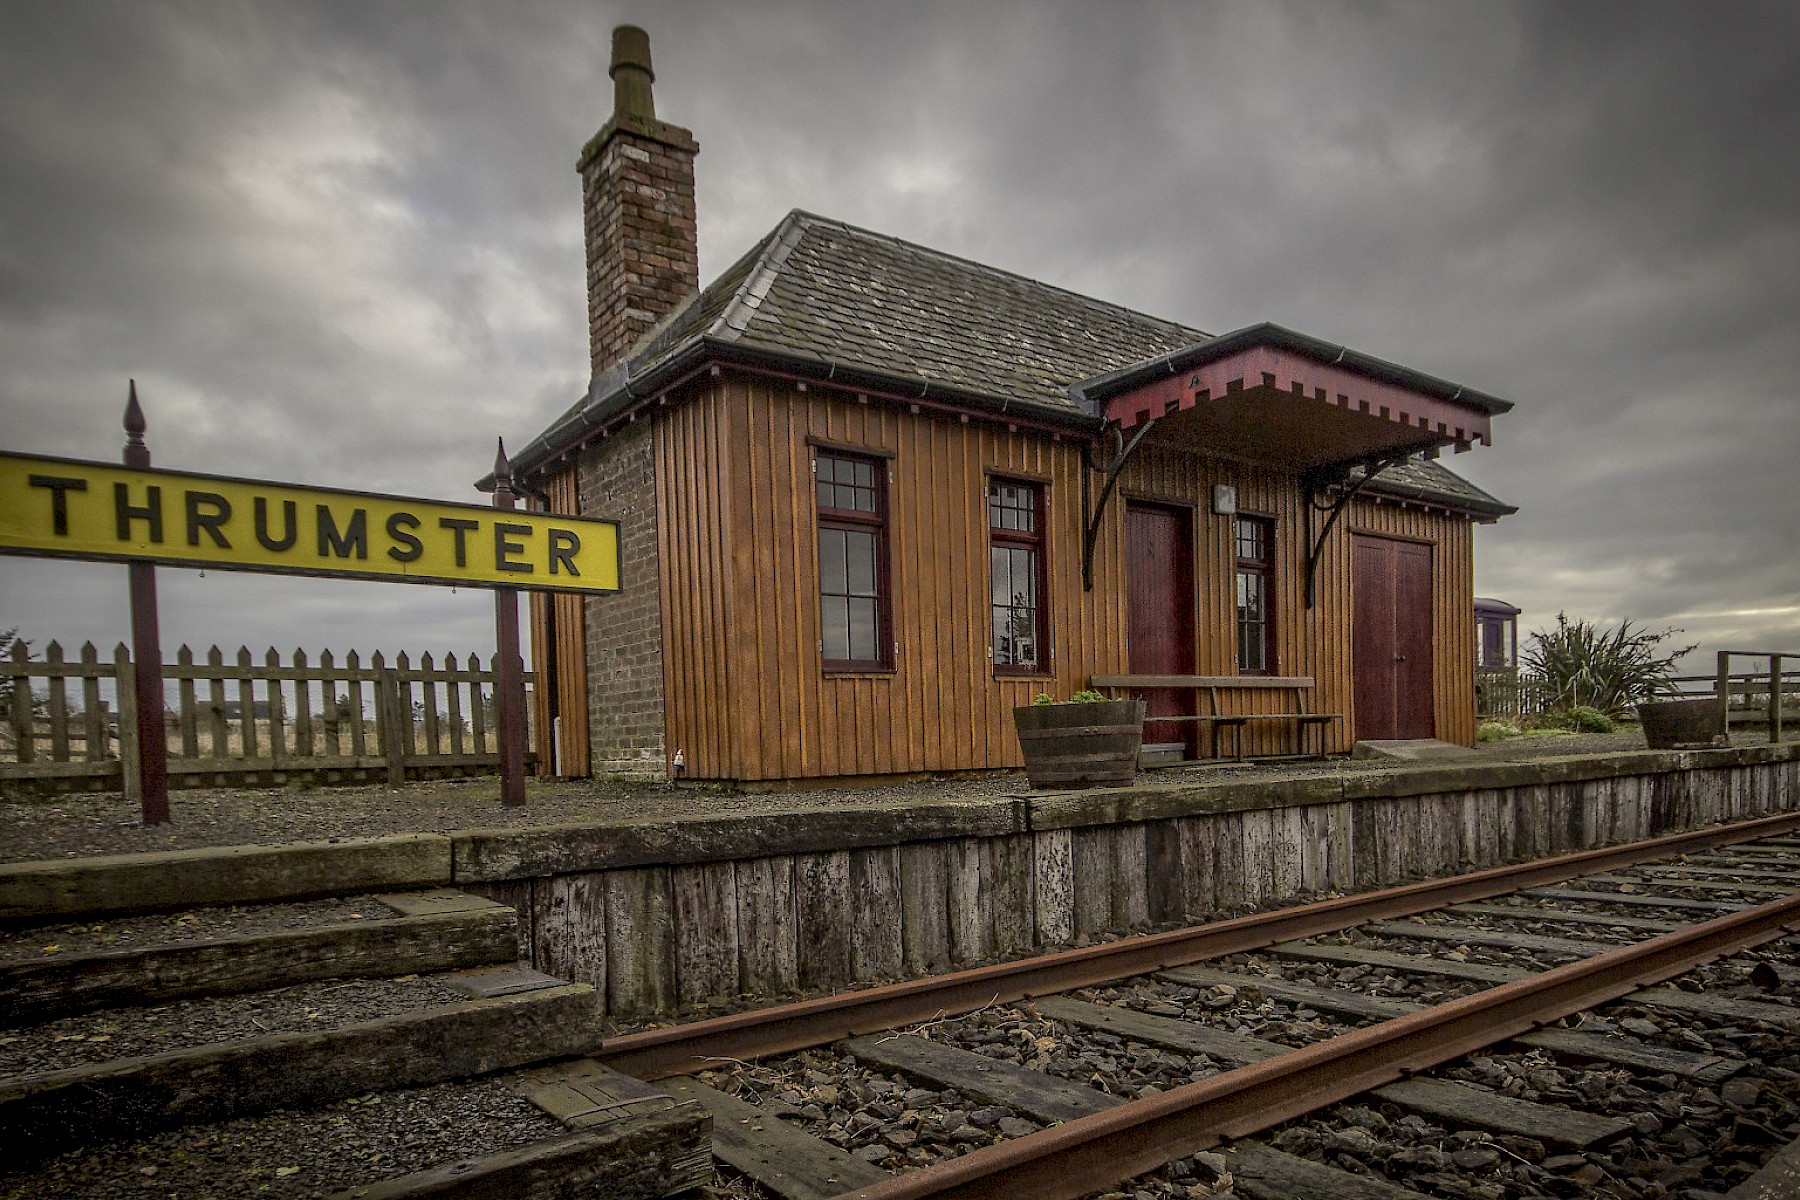 Thrumster image: Single platform train station with small wooden platform house.